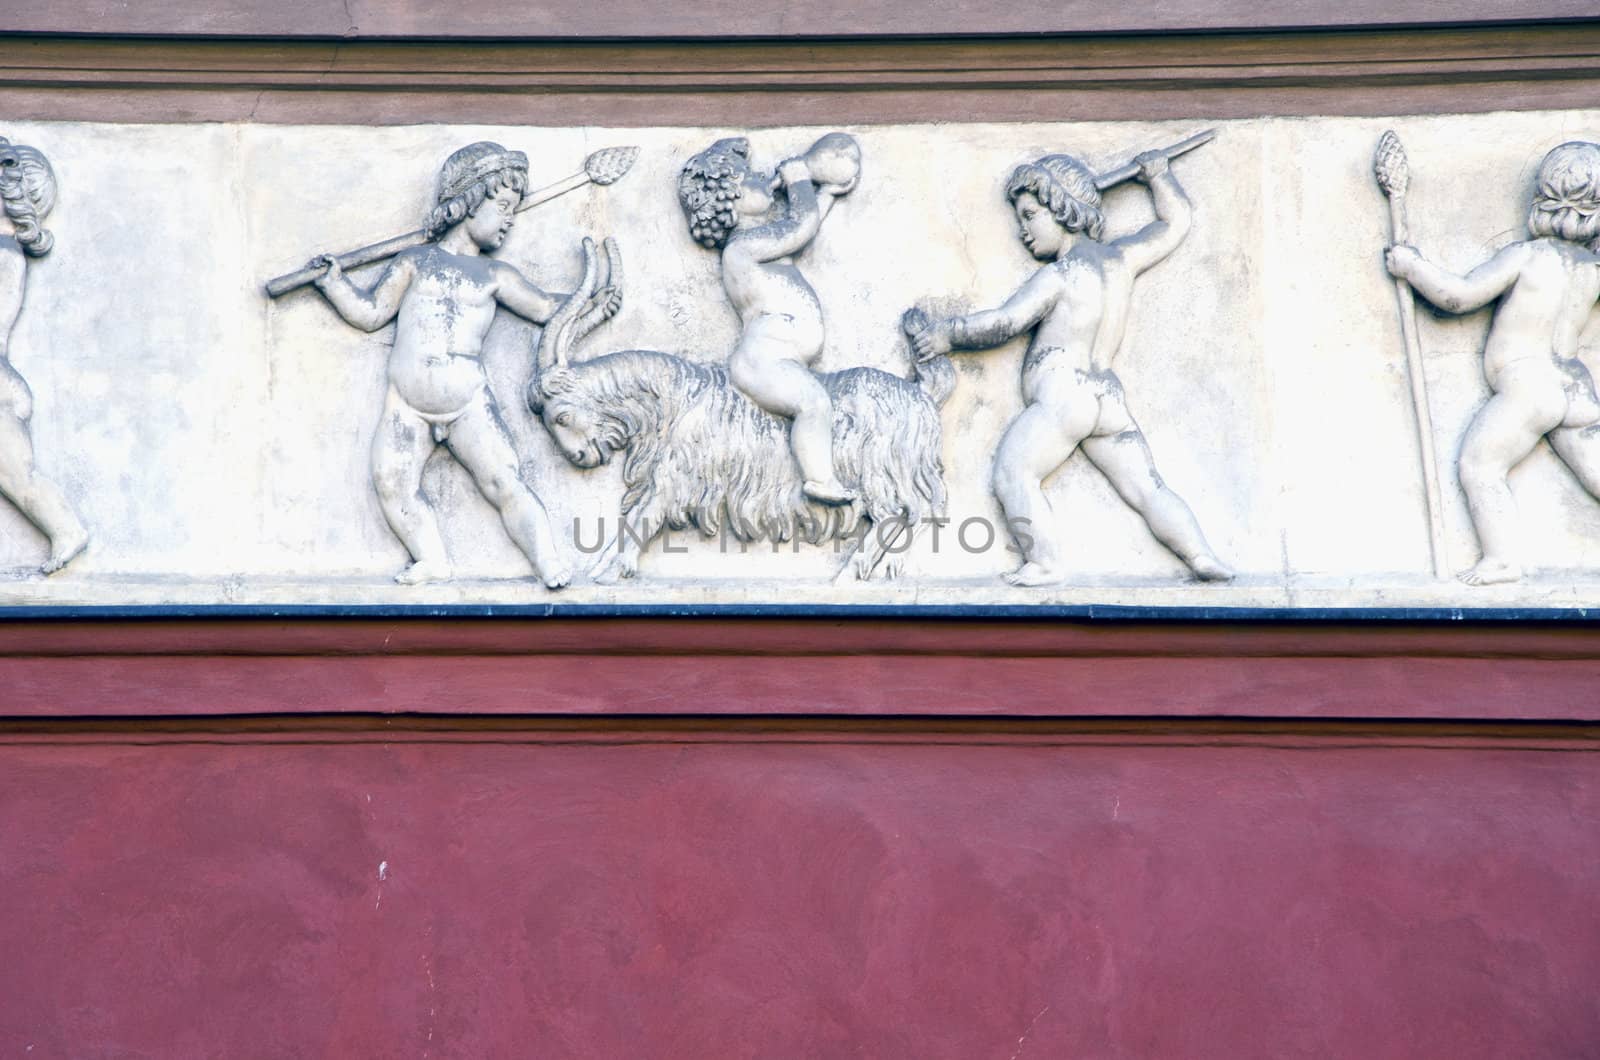 roman architectural retro vintage wall background. people shown in artwork hunting animal.